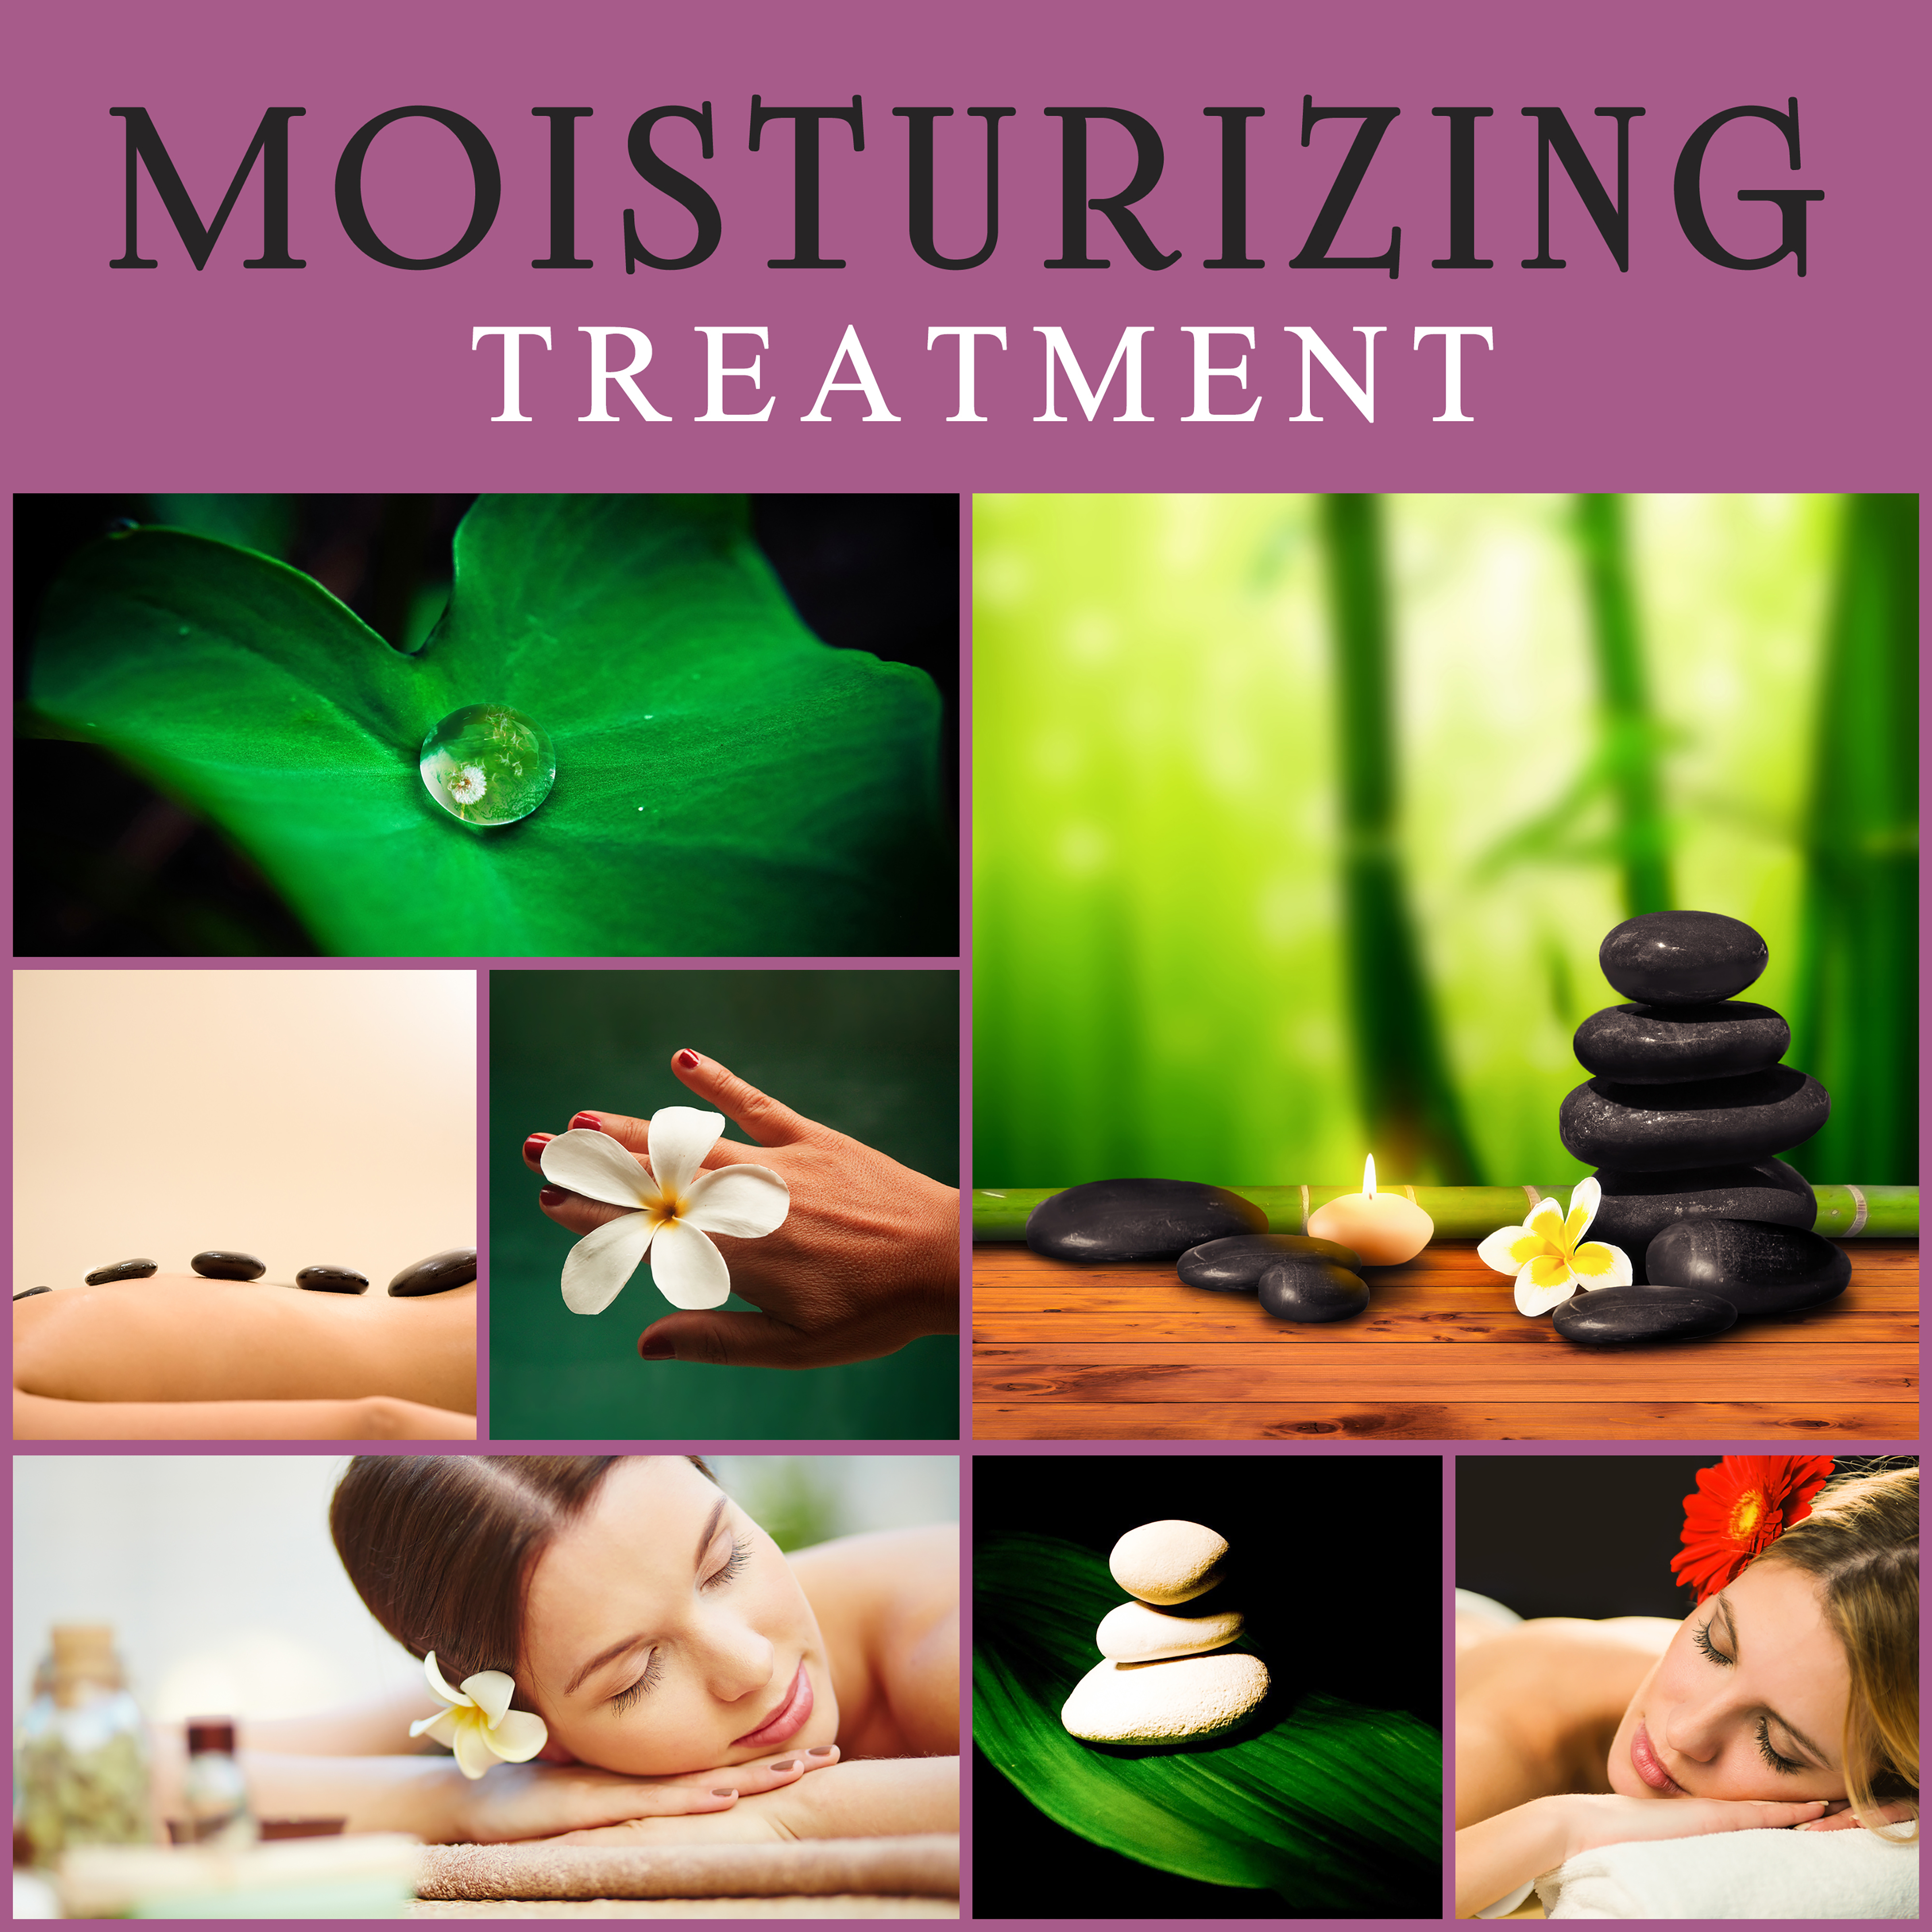 Moisturizing Treatment - Time to Relax, Positive Impact on Body, Moment of Relaxation, Curious Cosmetics, Wonderful Refreshing, Soft Body